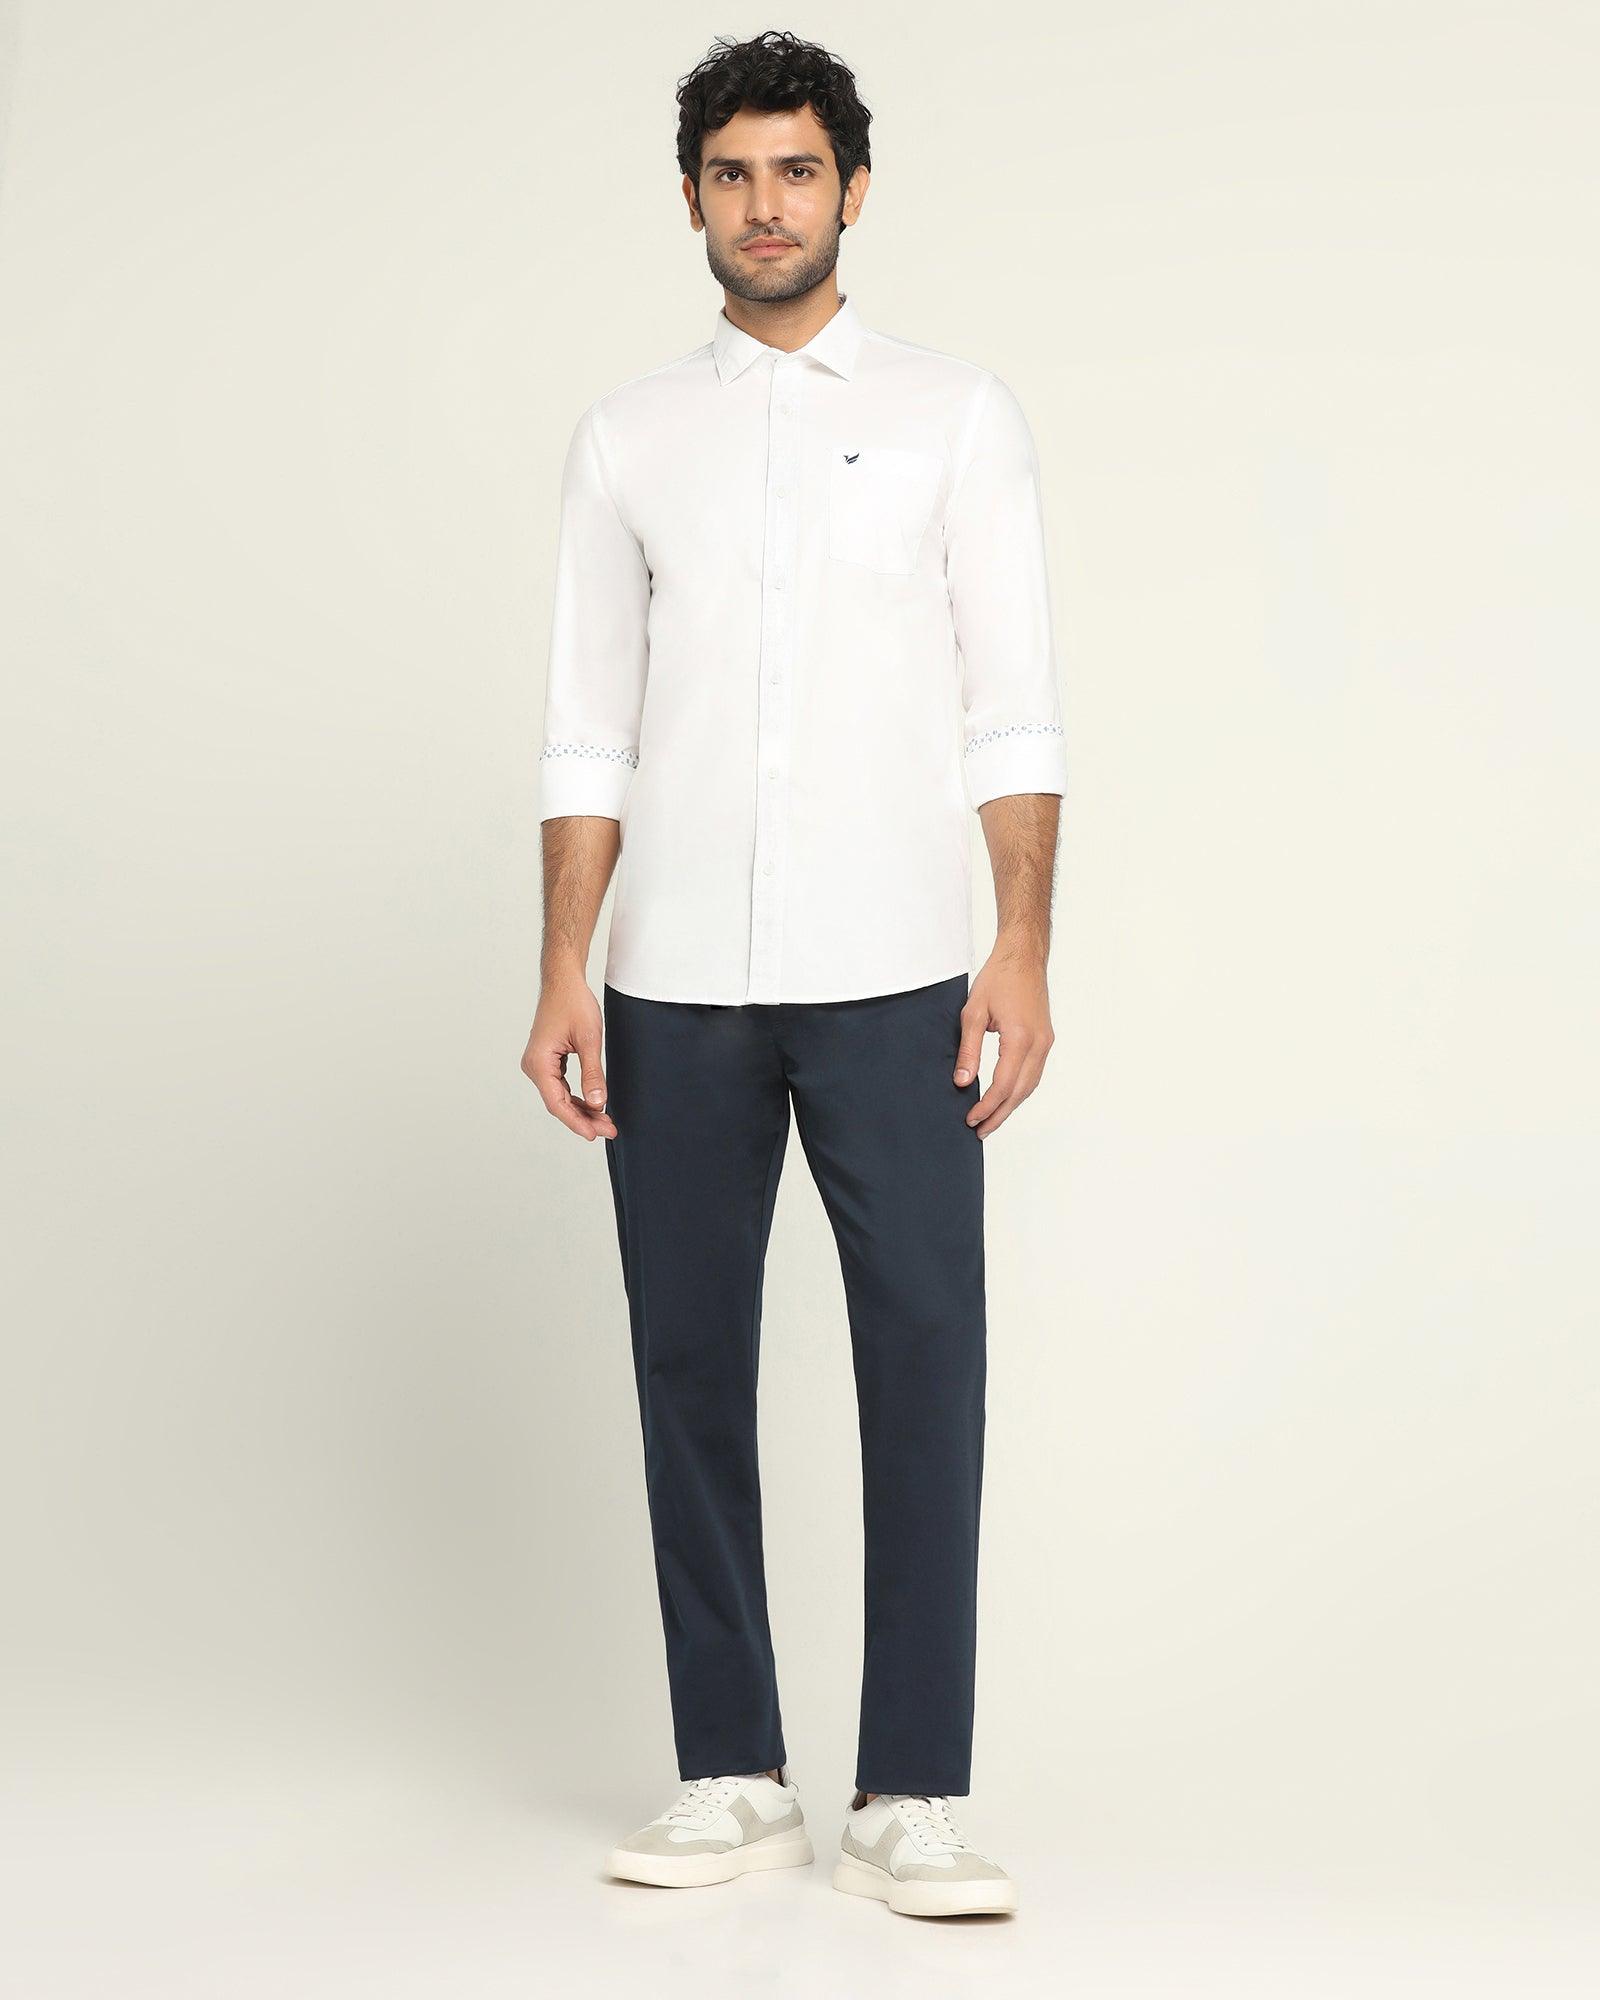 Must Haves Casual White Solid Shirt - Torch